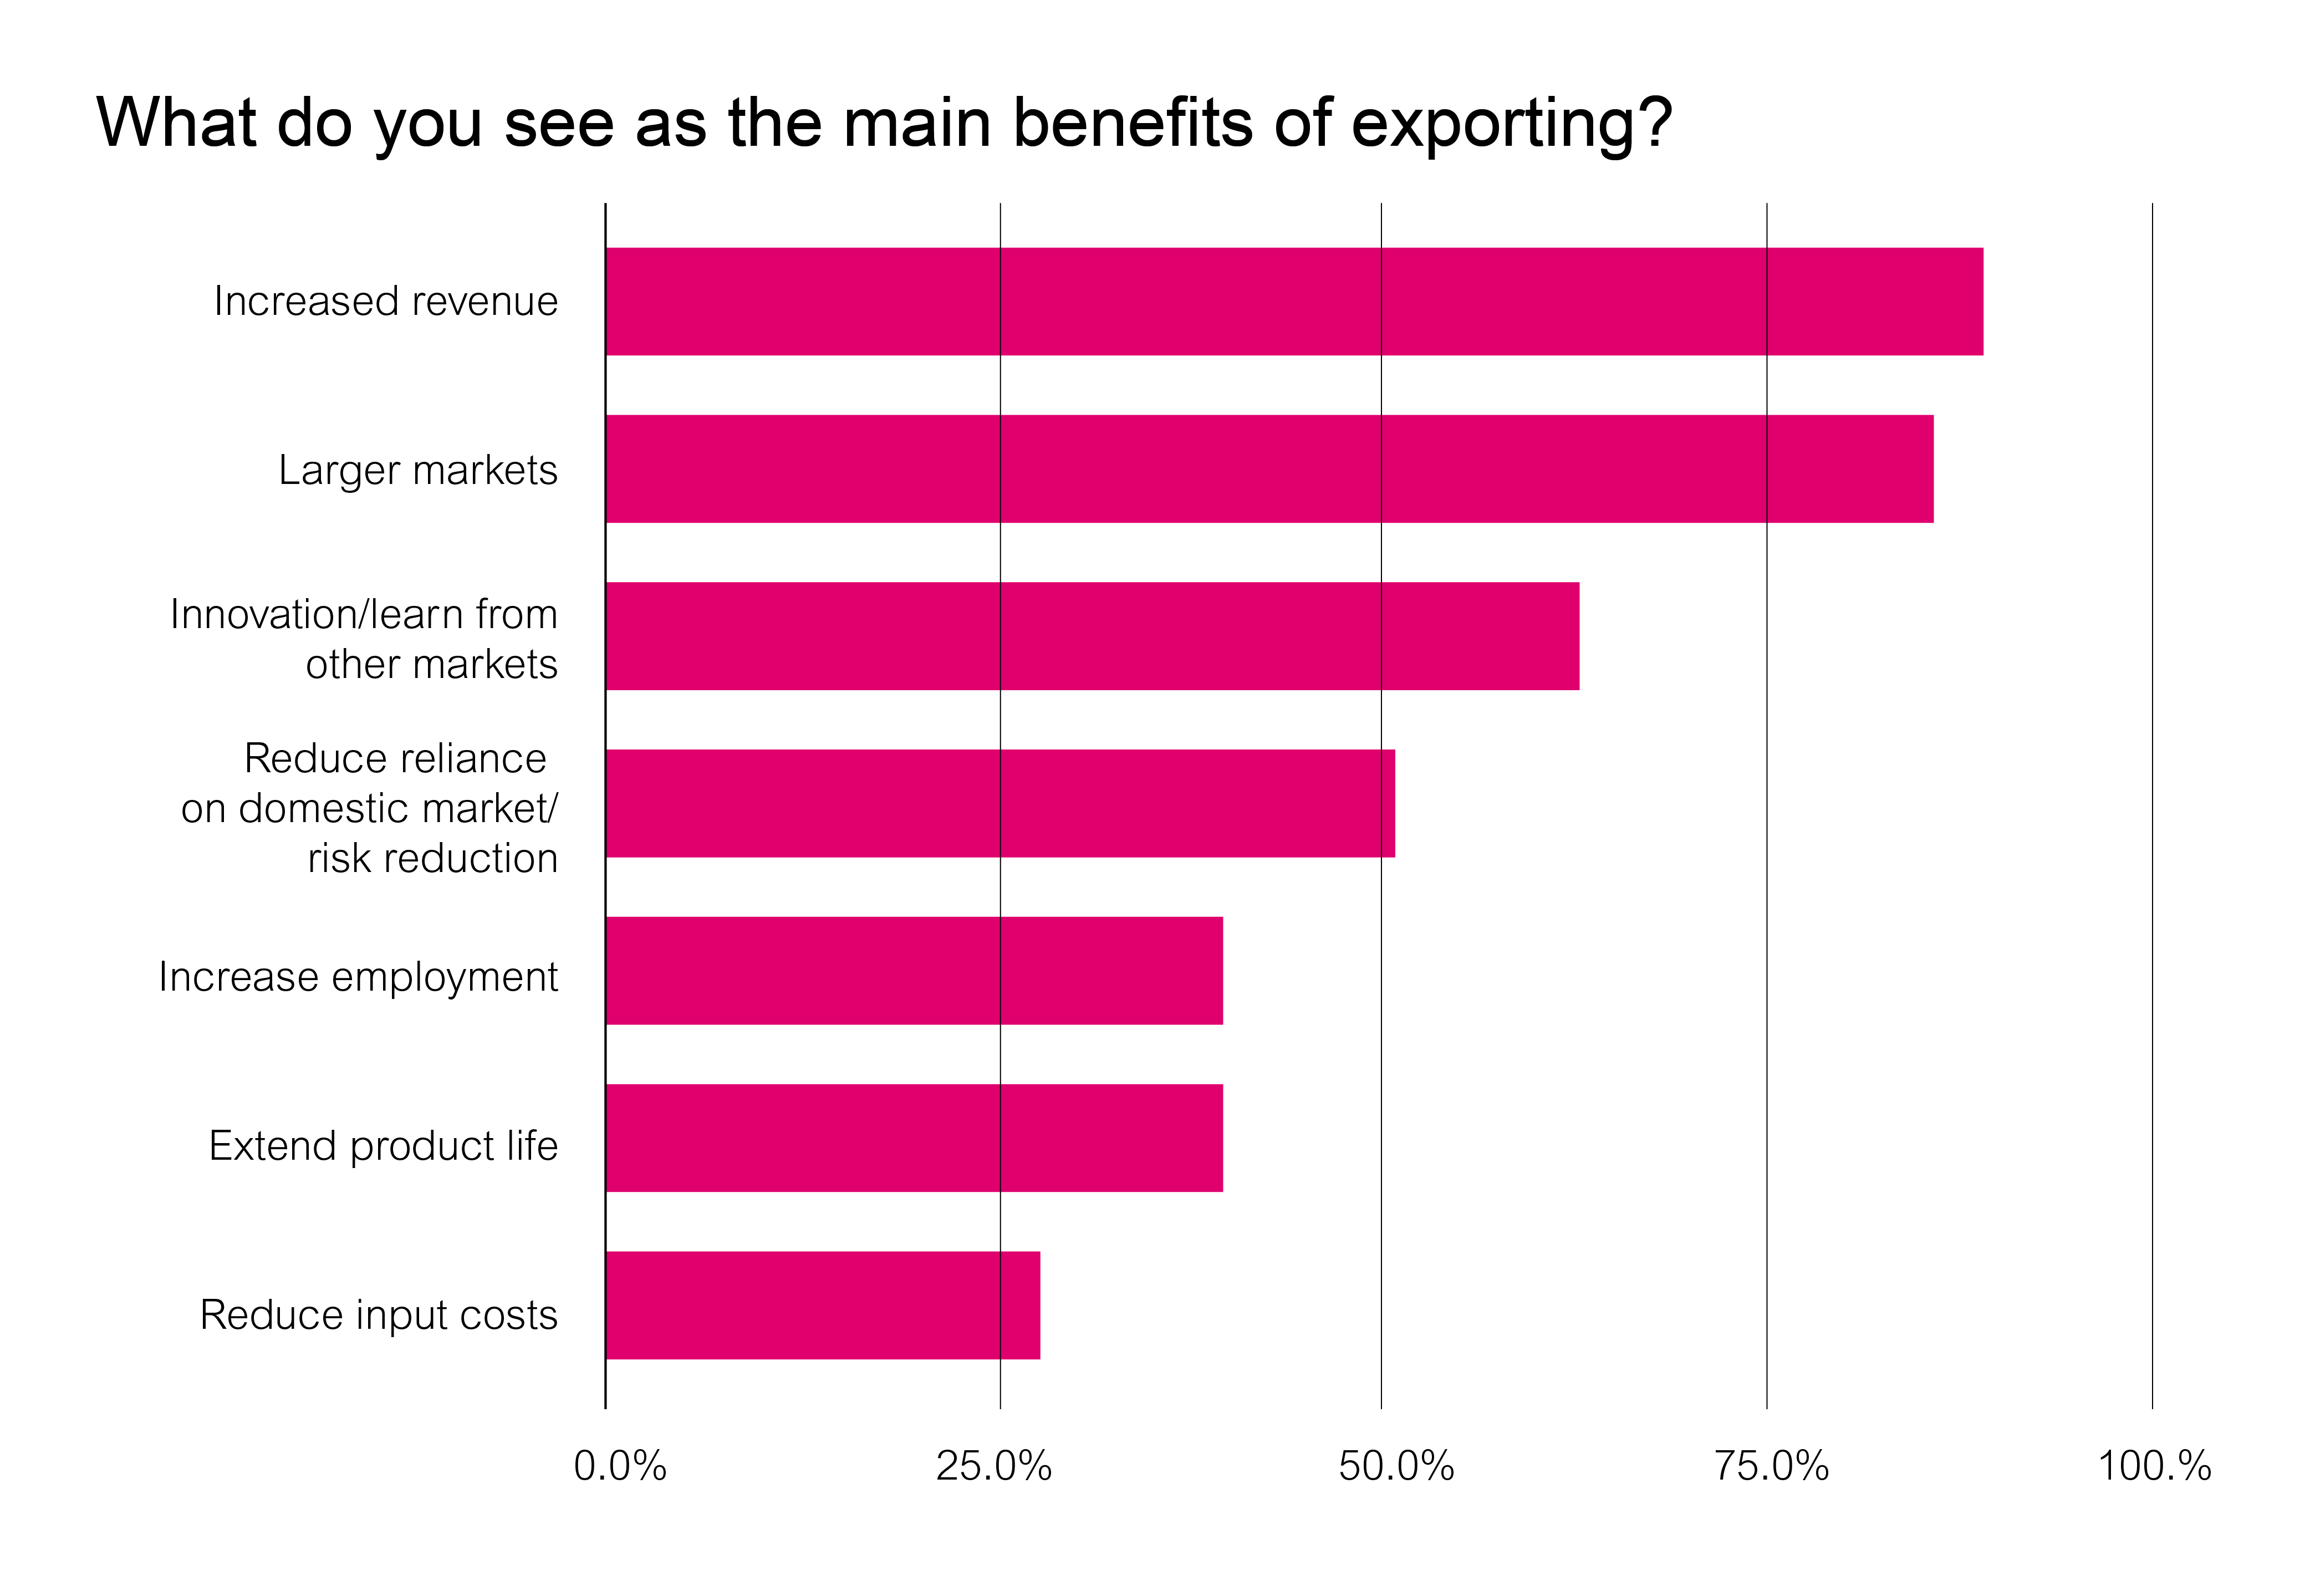 What do you see as the main benefits of exporting?